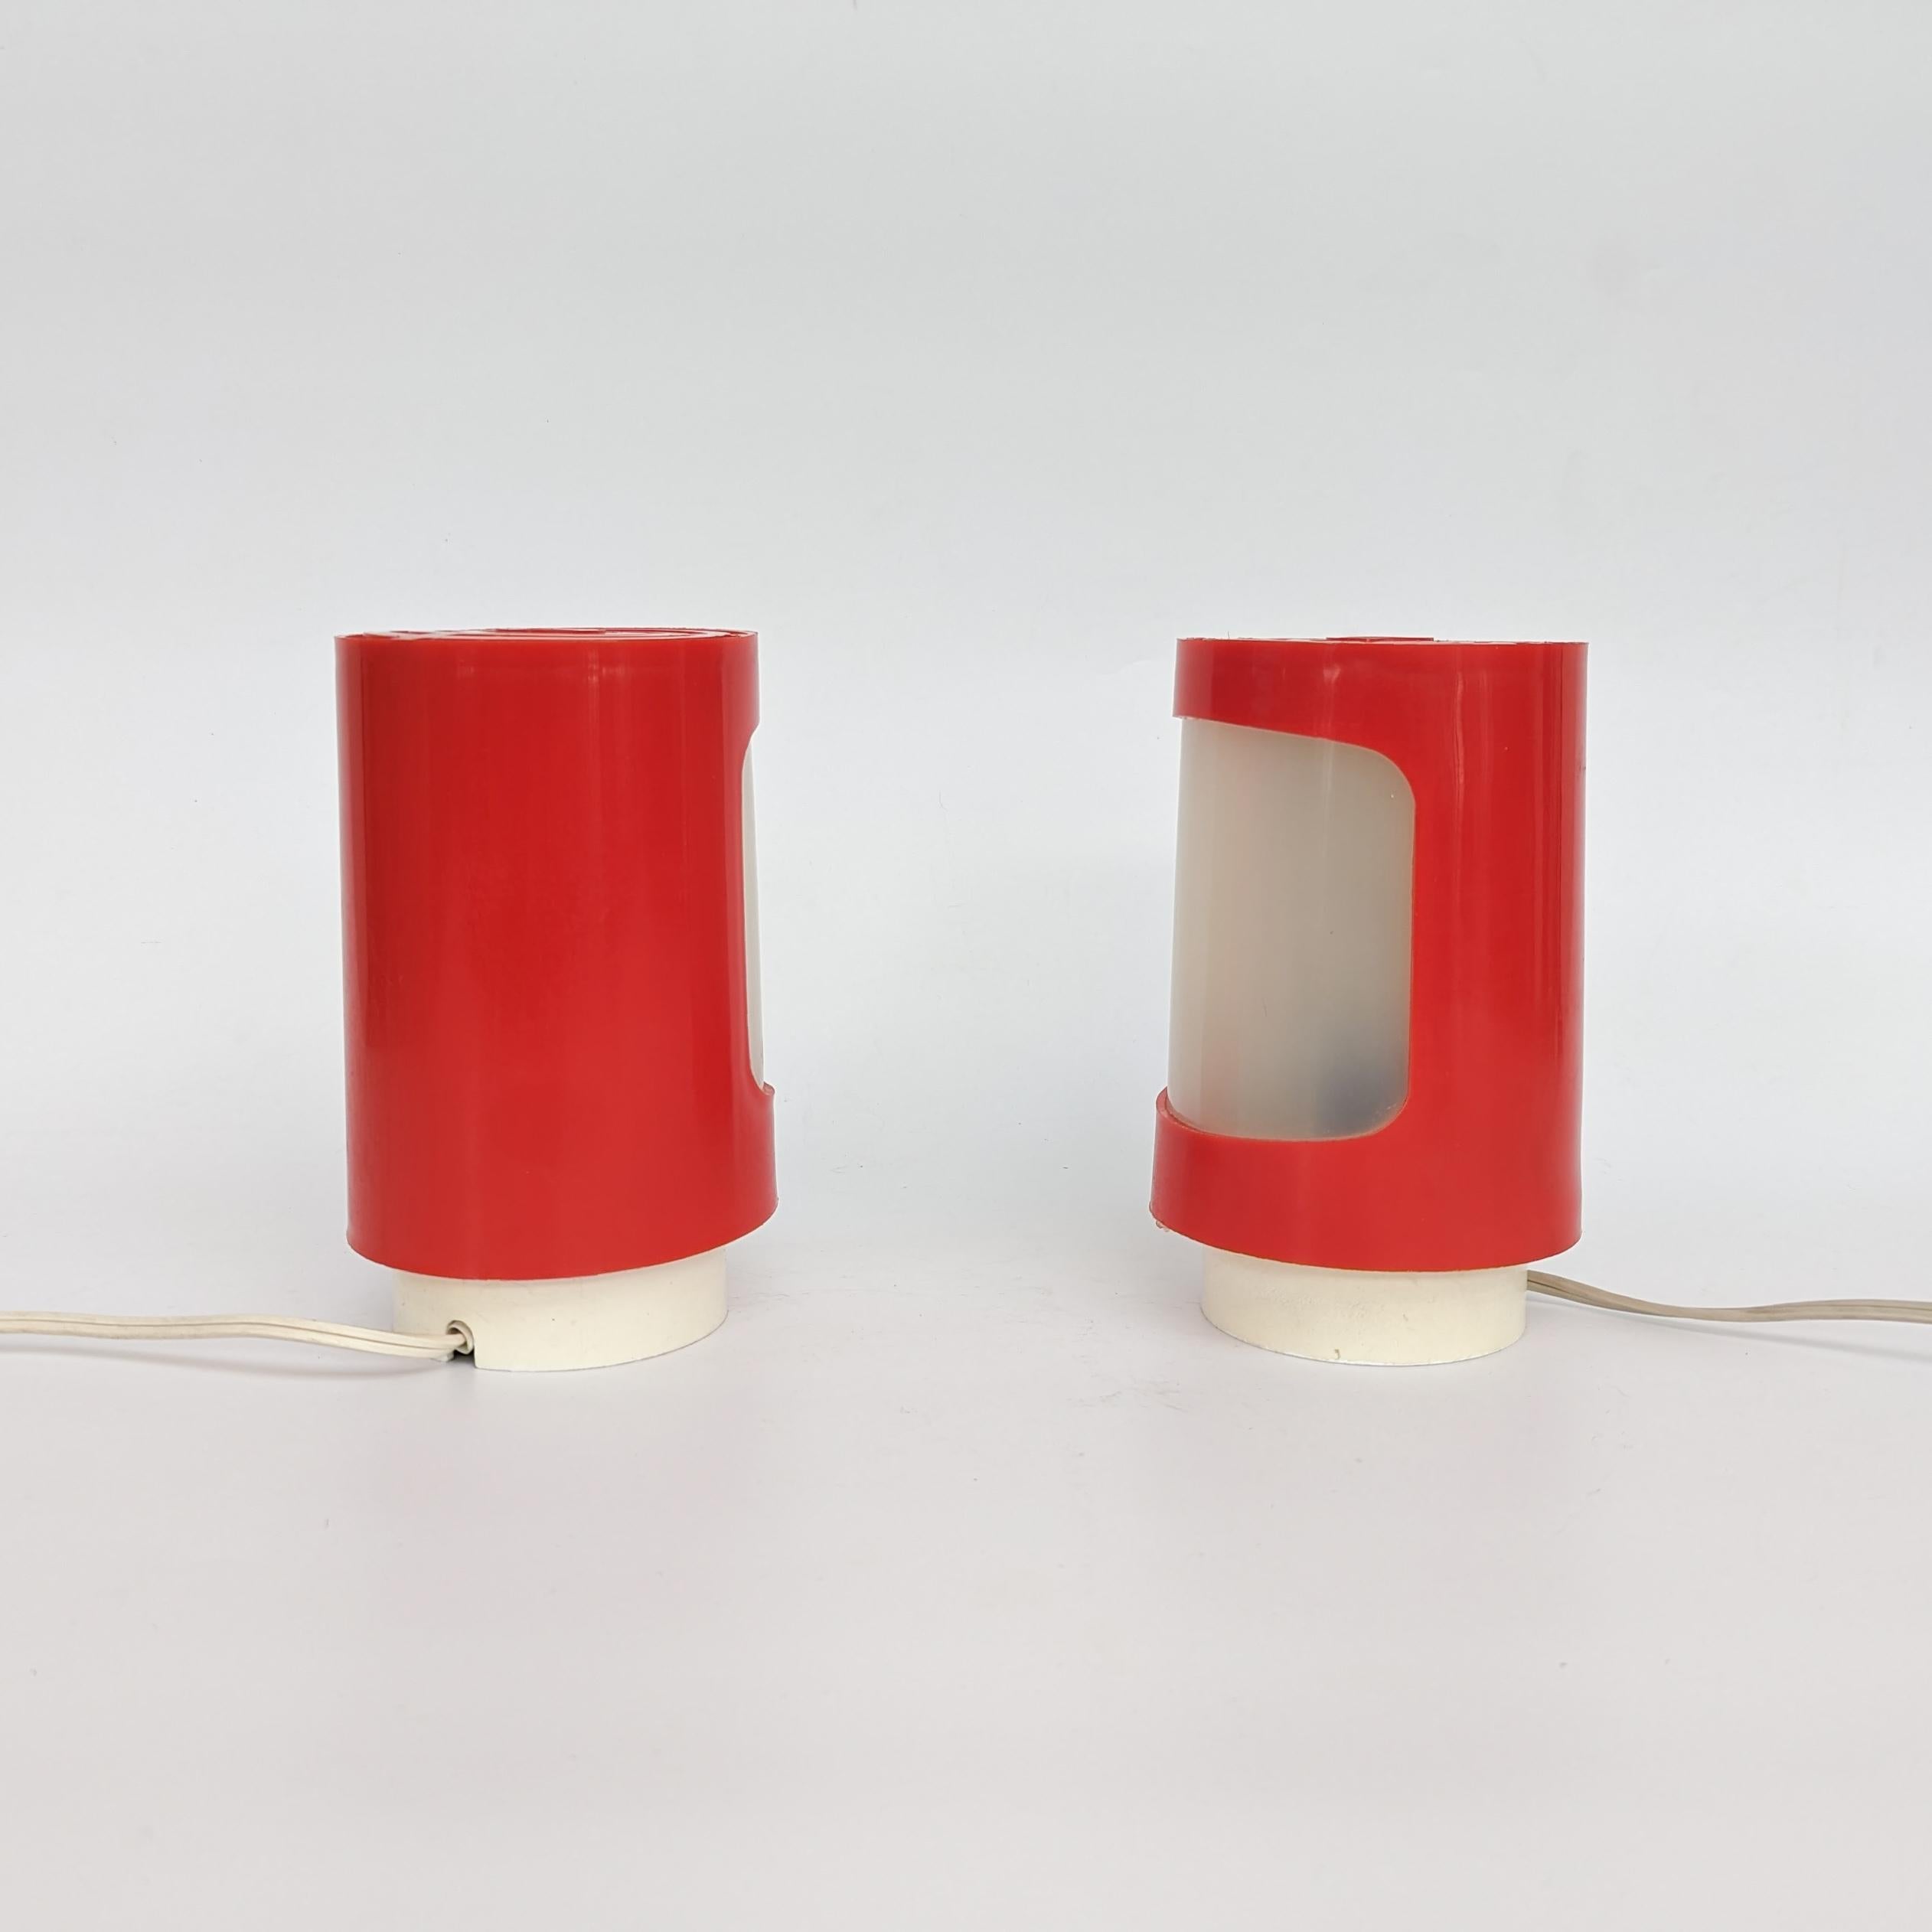 Czech Pair of space age red plastic table lamps by Elektrosvit, 1960s For Sale